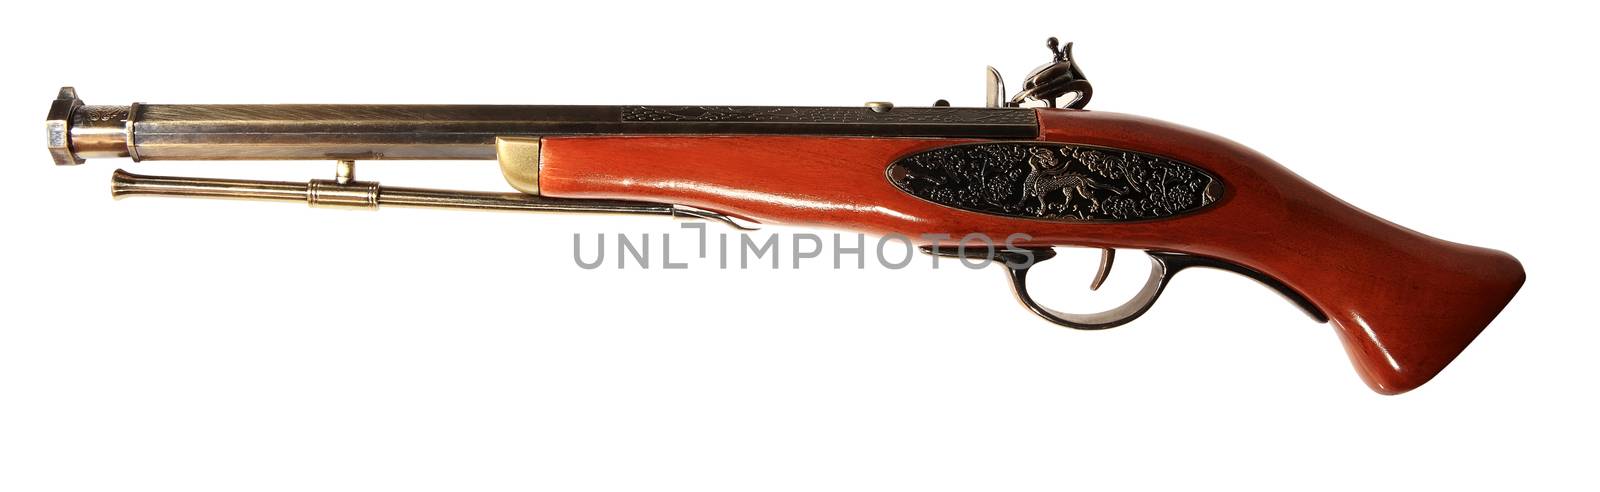 Model of the old gun on the white background, souvenir